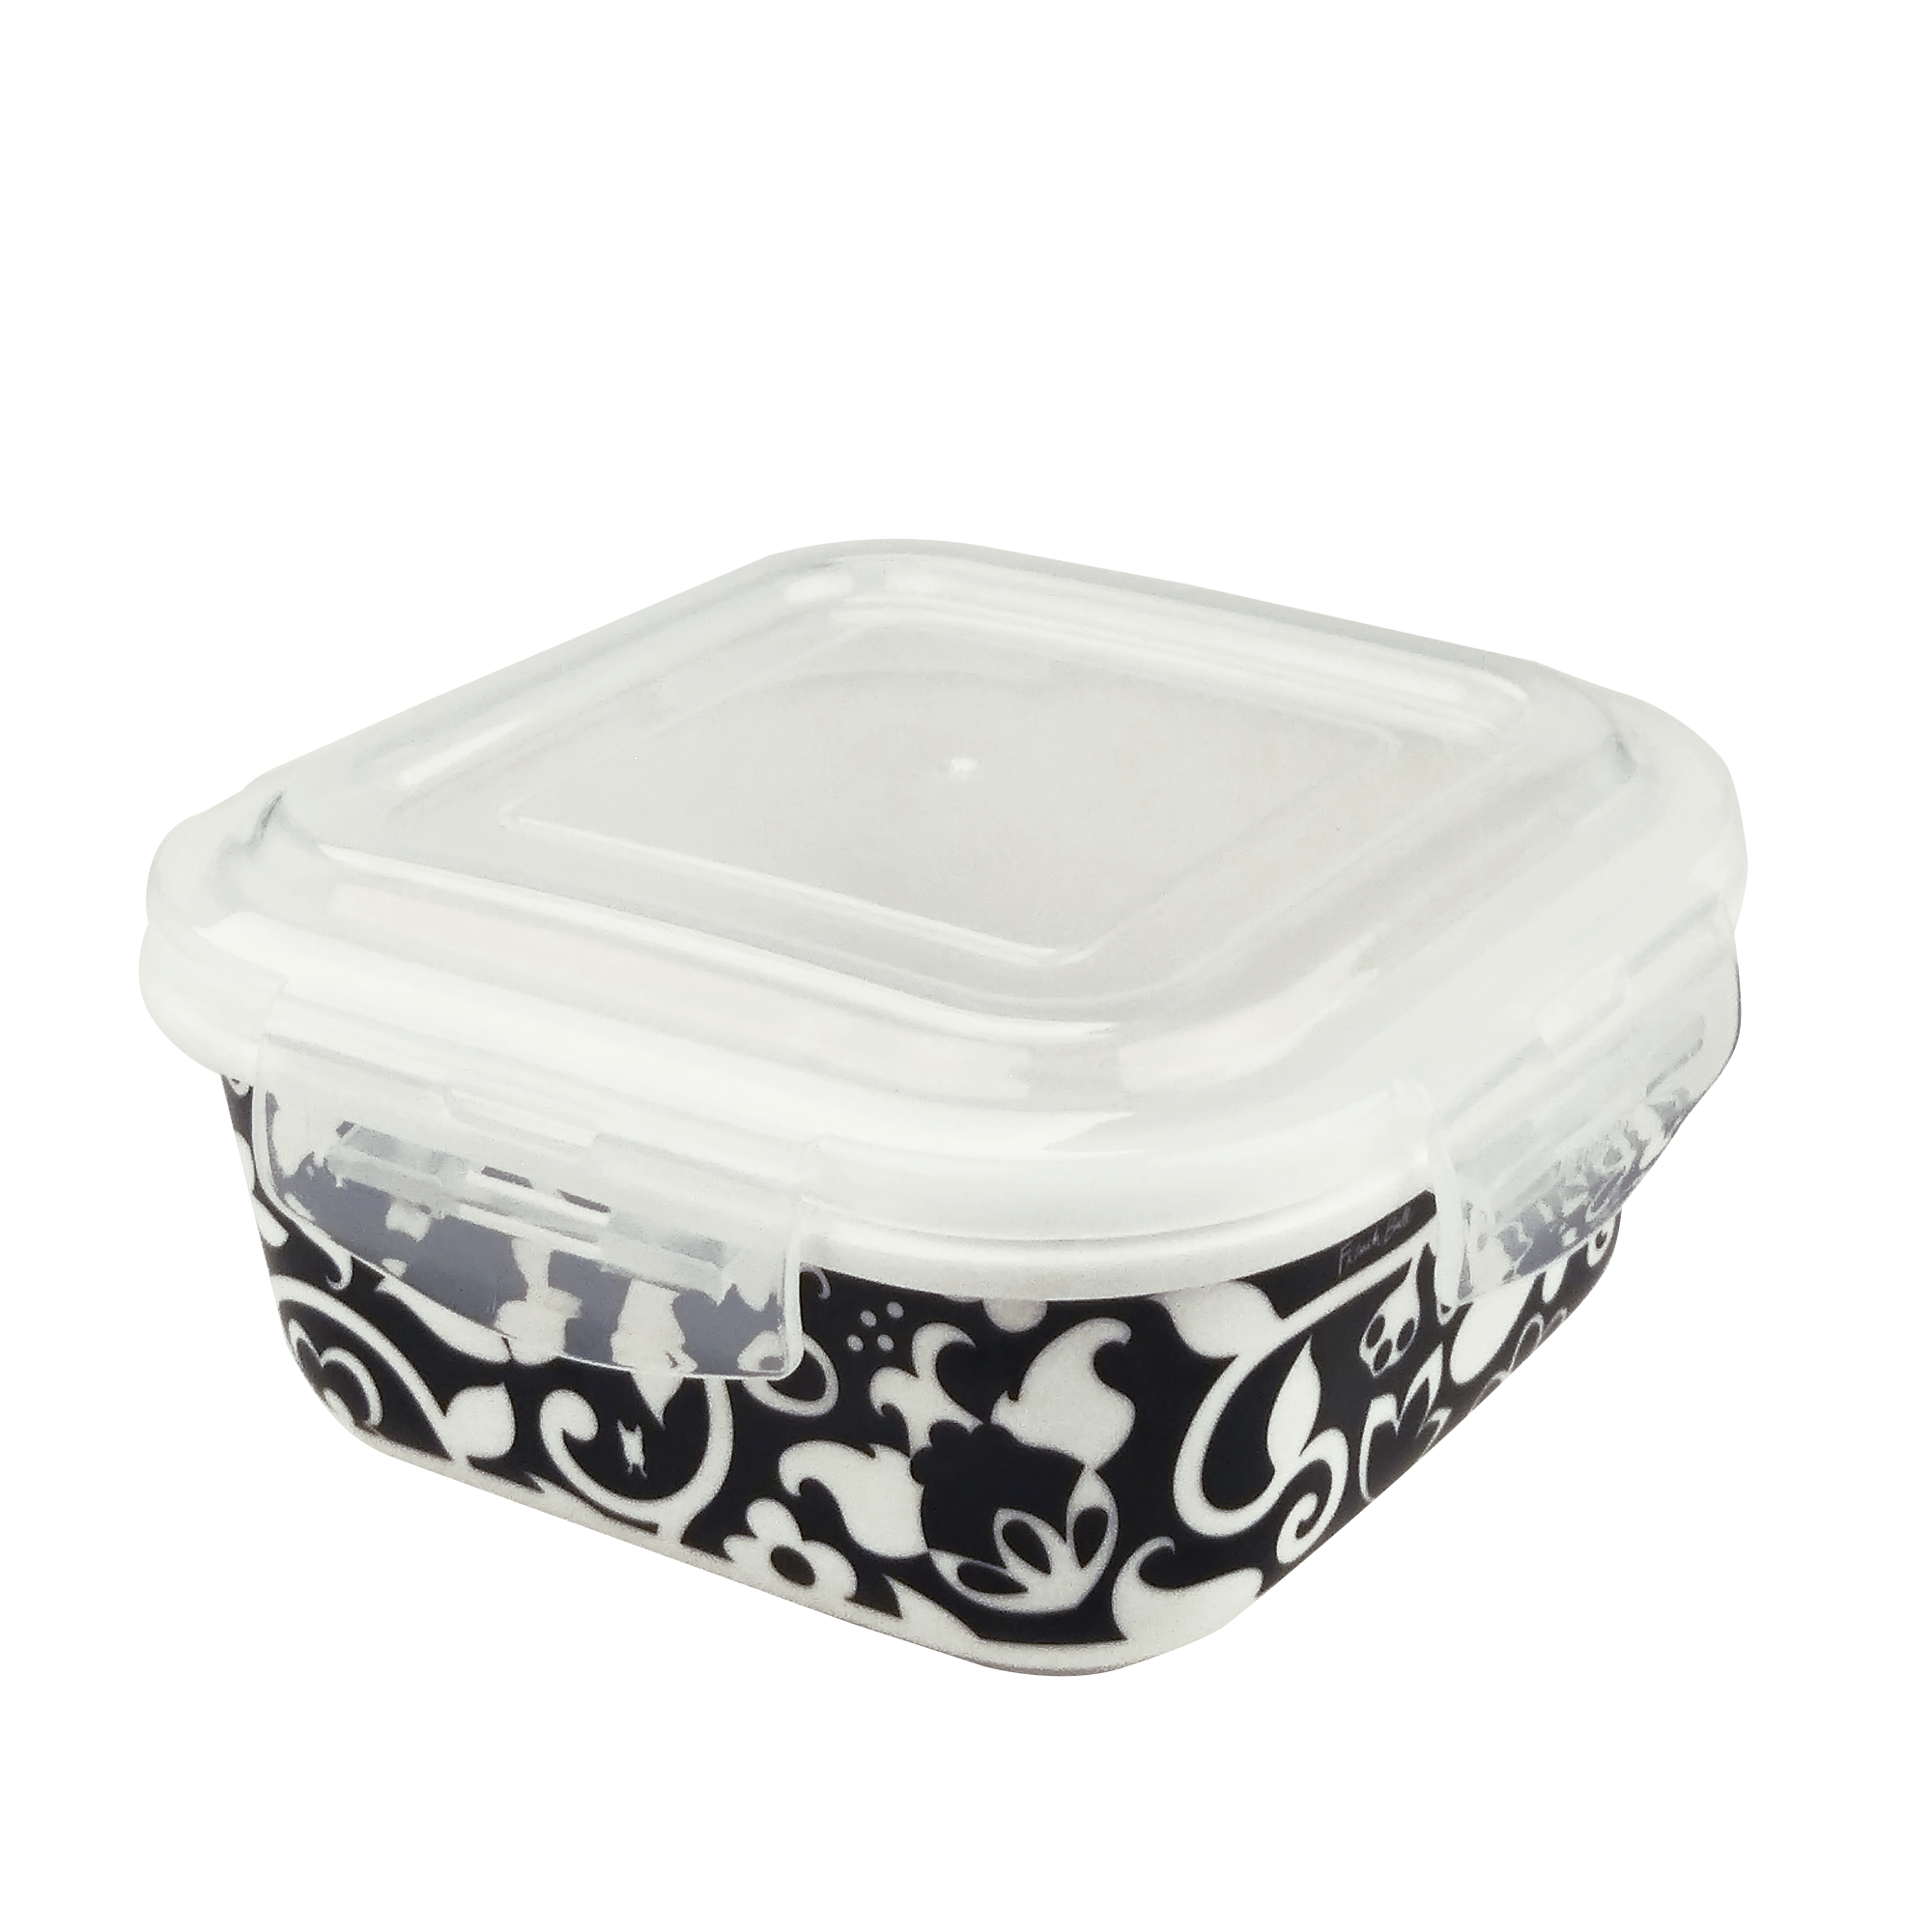 Ziggy Large Round Porcelain Food Storage Container - French Bull